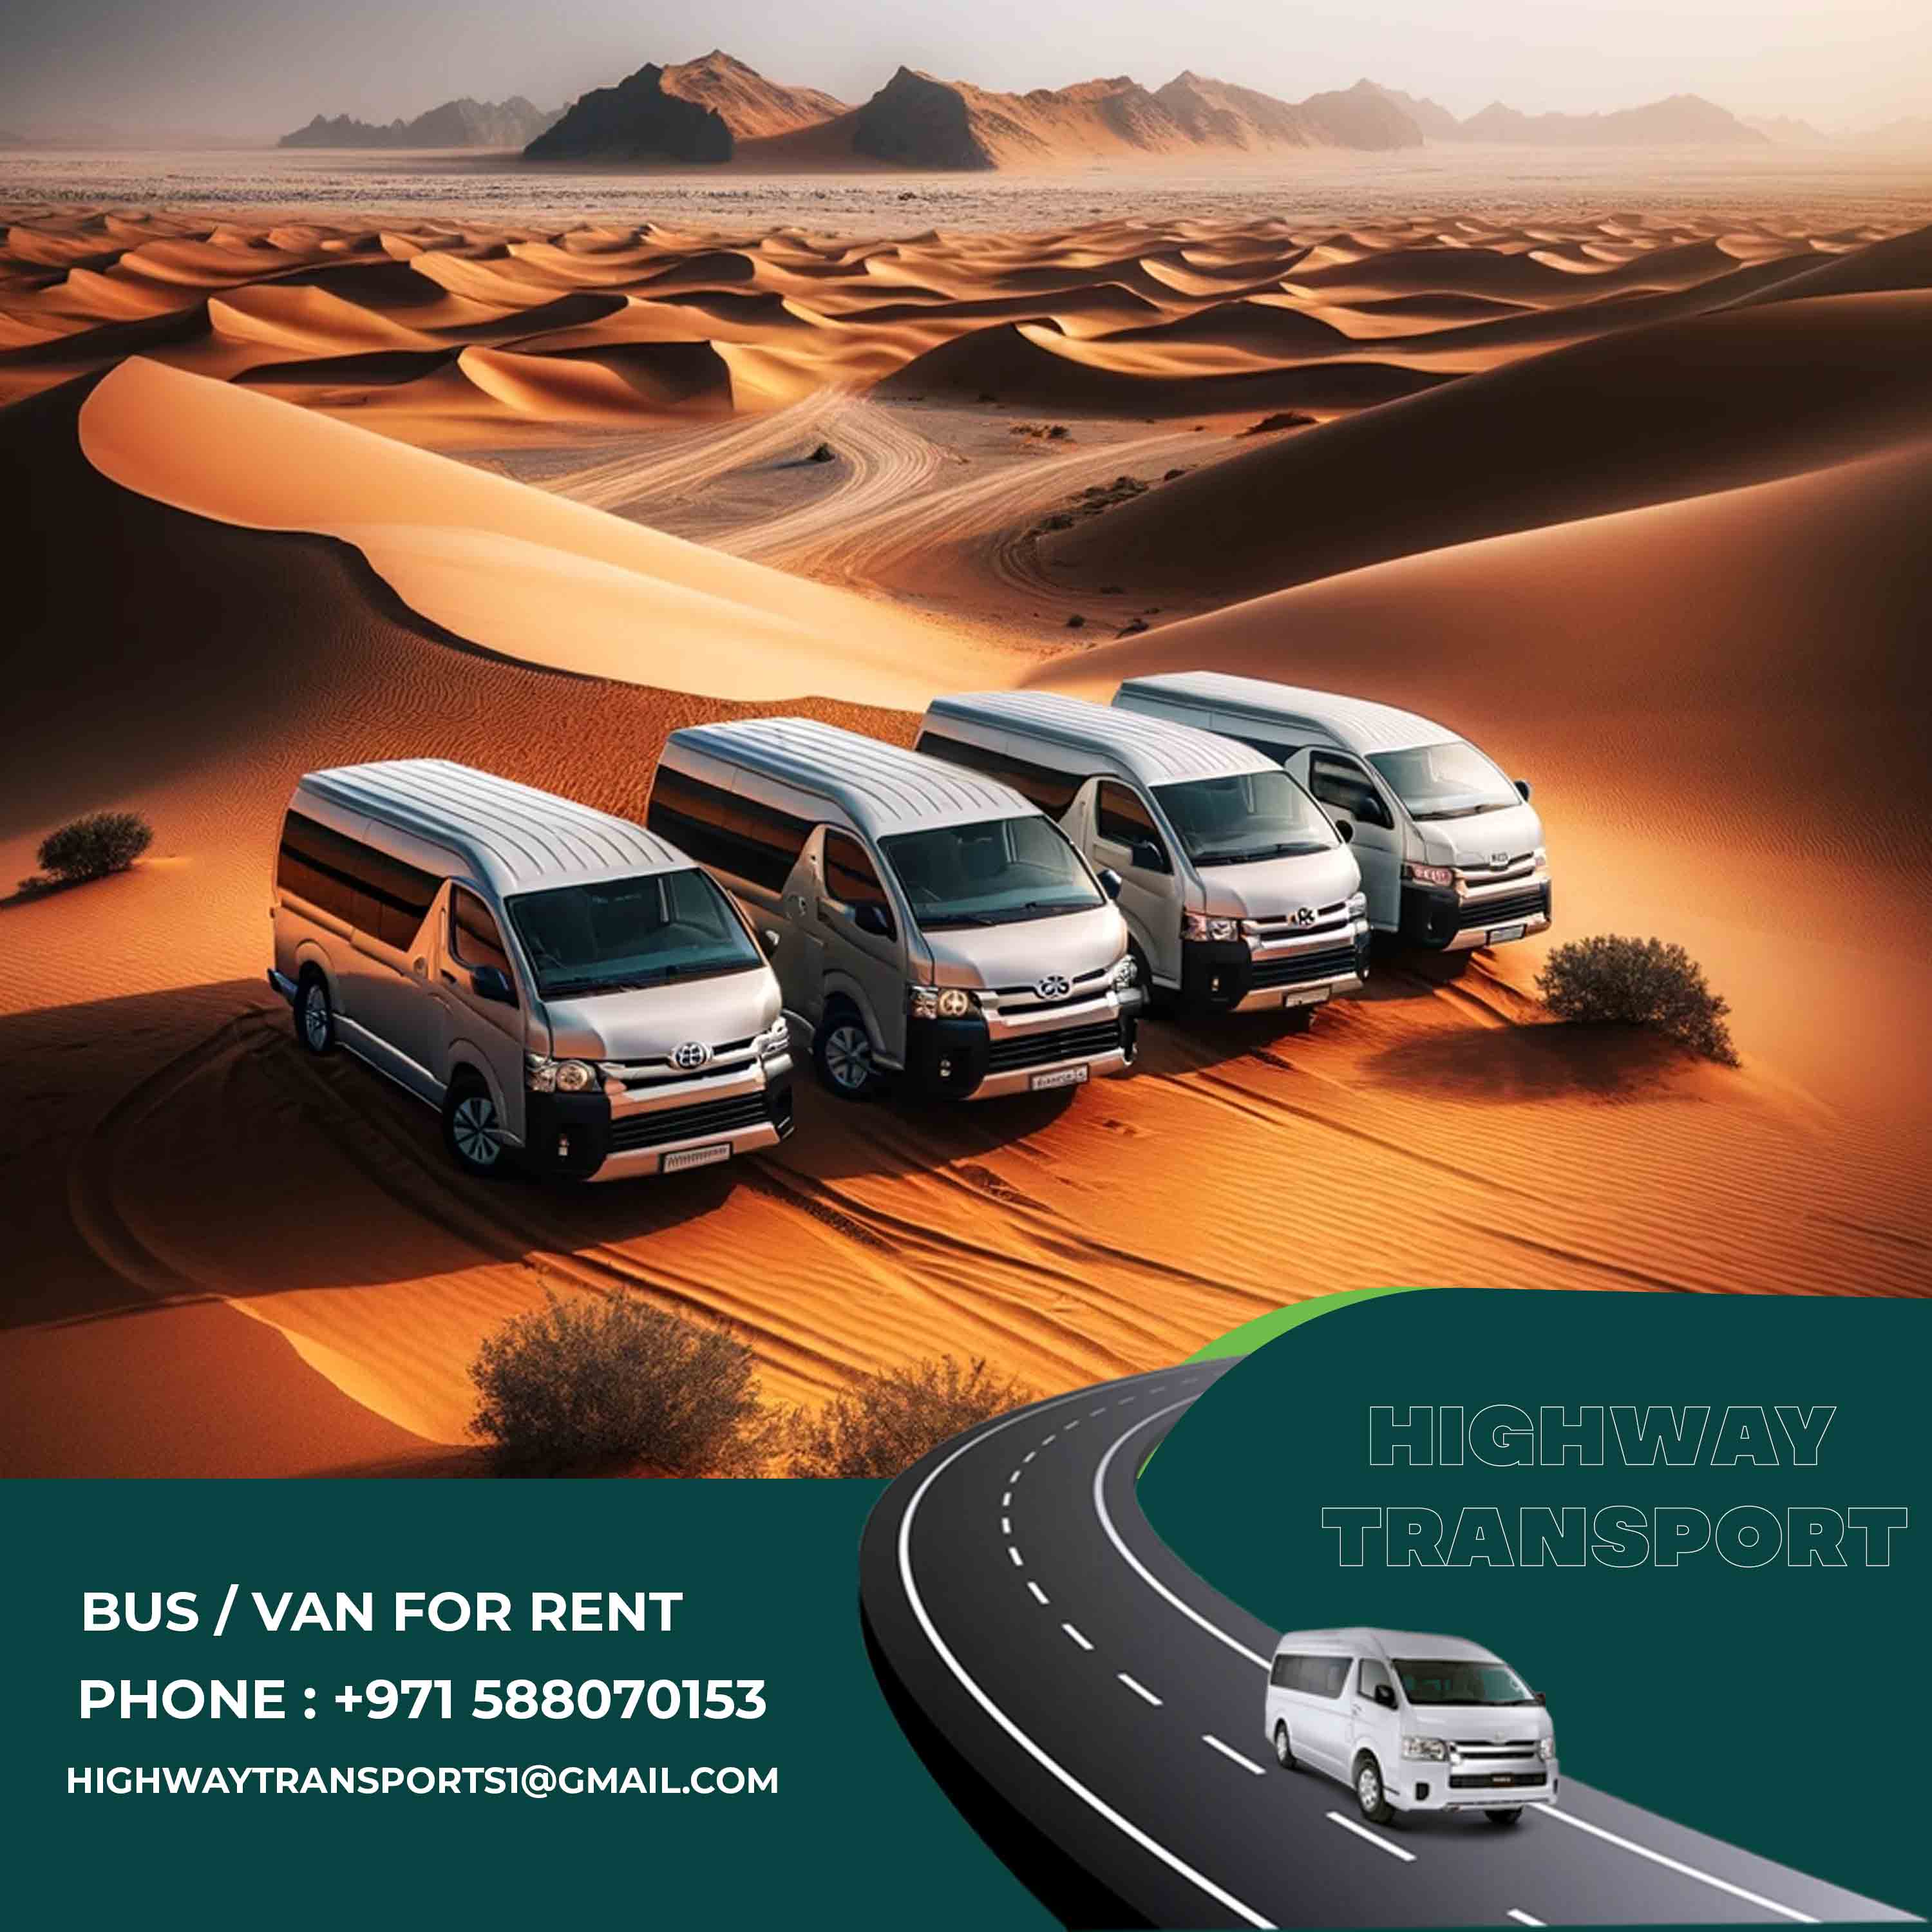 Image of a 12 seater van available for rental in Abu Dhabi